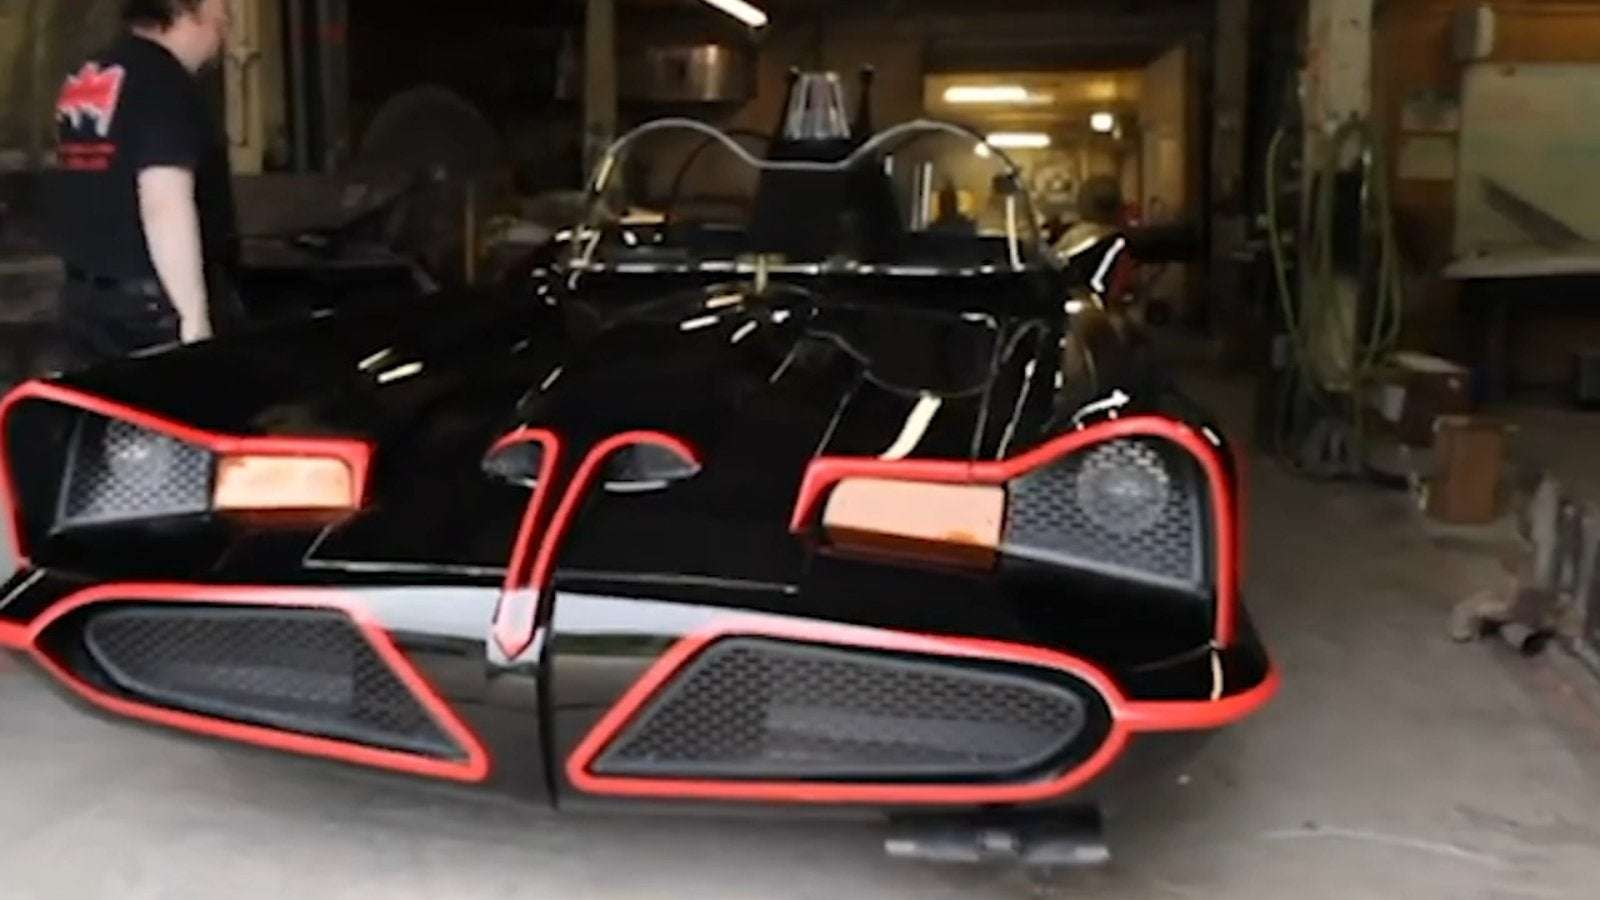 image for EXCLUSIVE: NorCal sheriff orders raid on Indiana Batmobile garage, allegedly as favor for friend